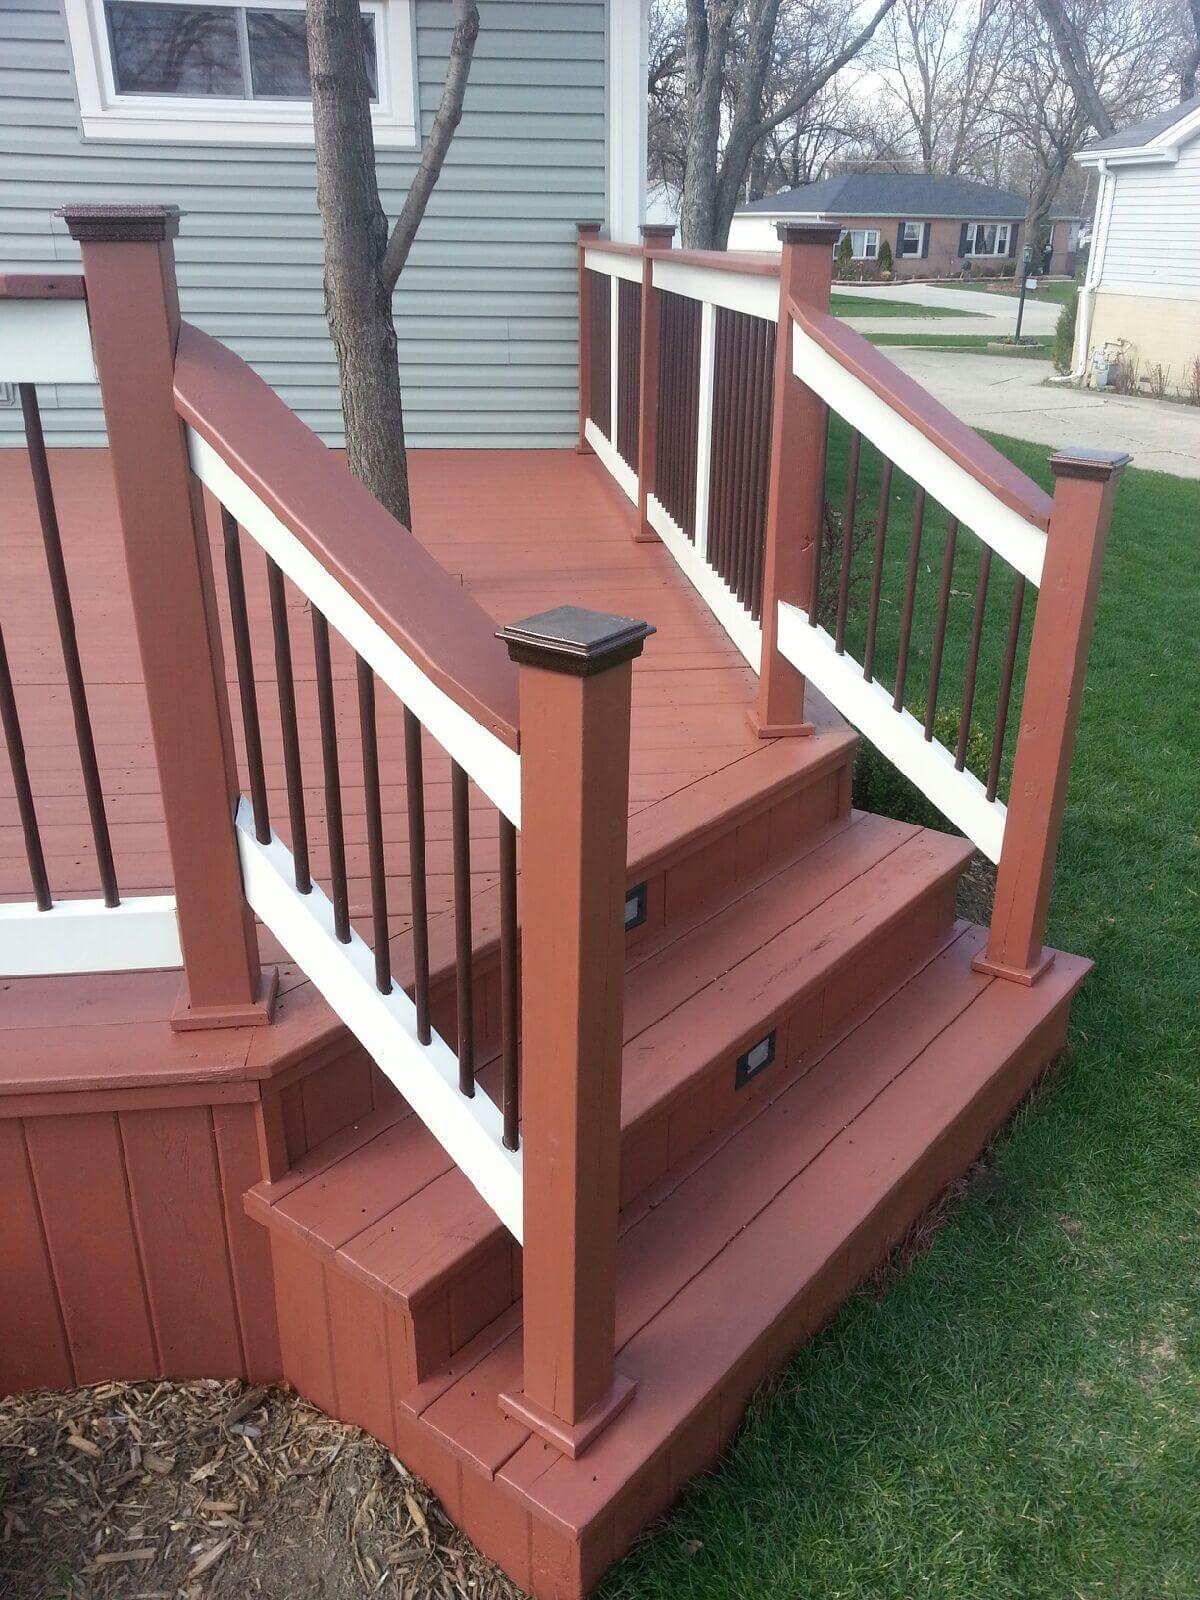 Repairs and maintenance for your deck, fence, and exterior wood staining. - Deck Staining Huntley - Deck Cleaning Services